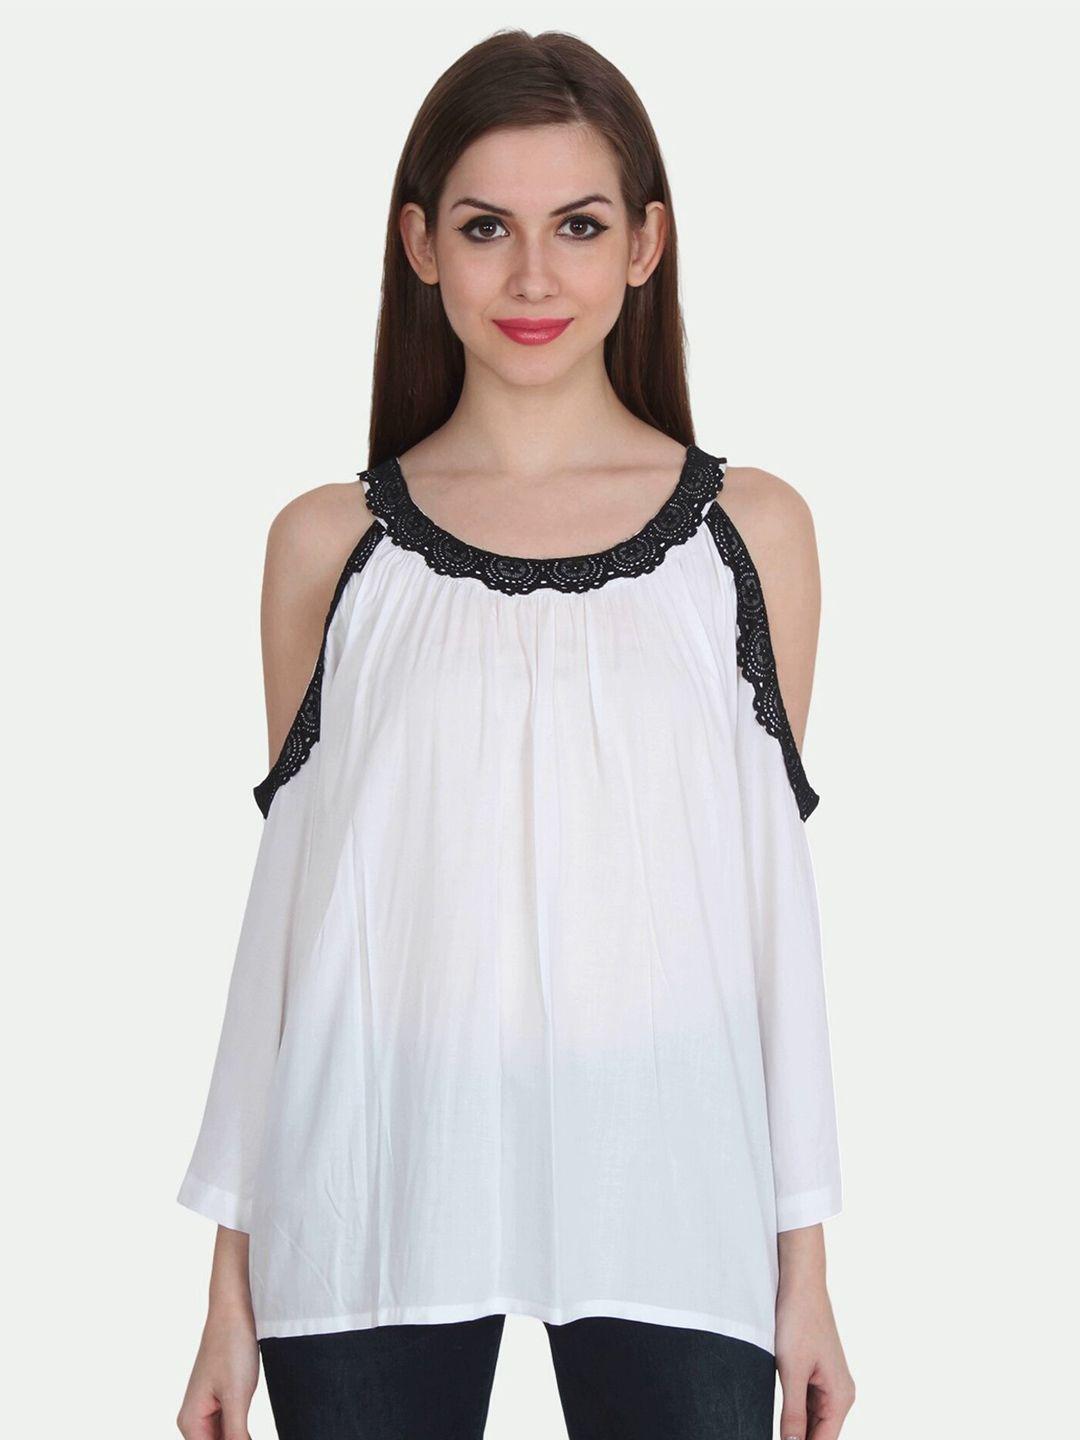 patrorna women white & black high-low cold shoulder sleeves boxy top